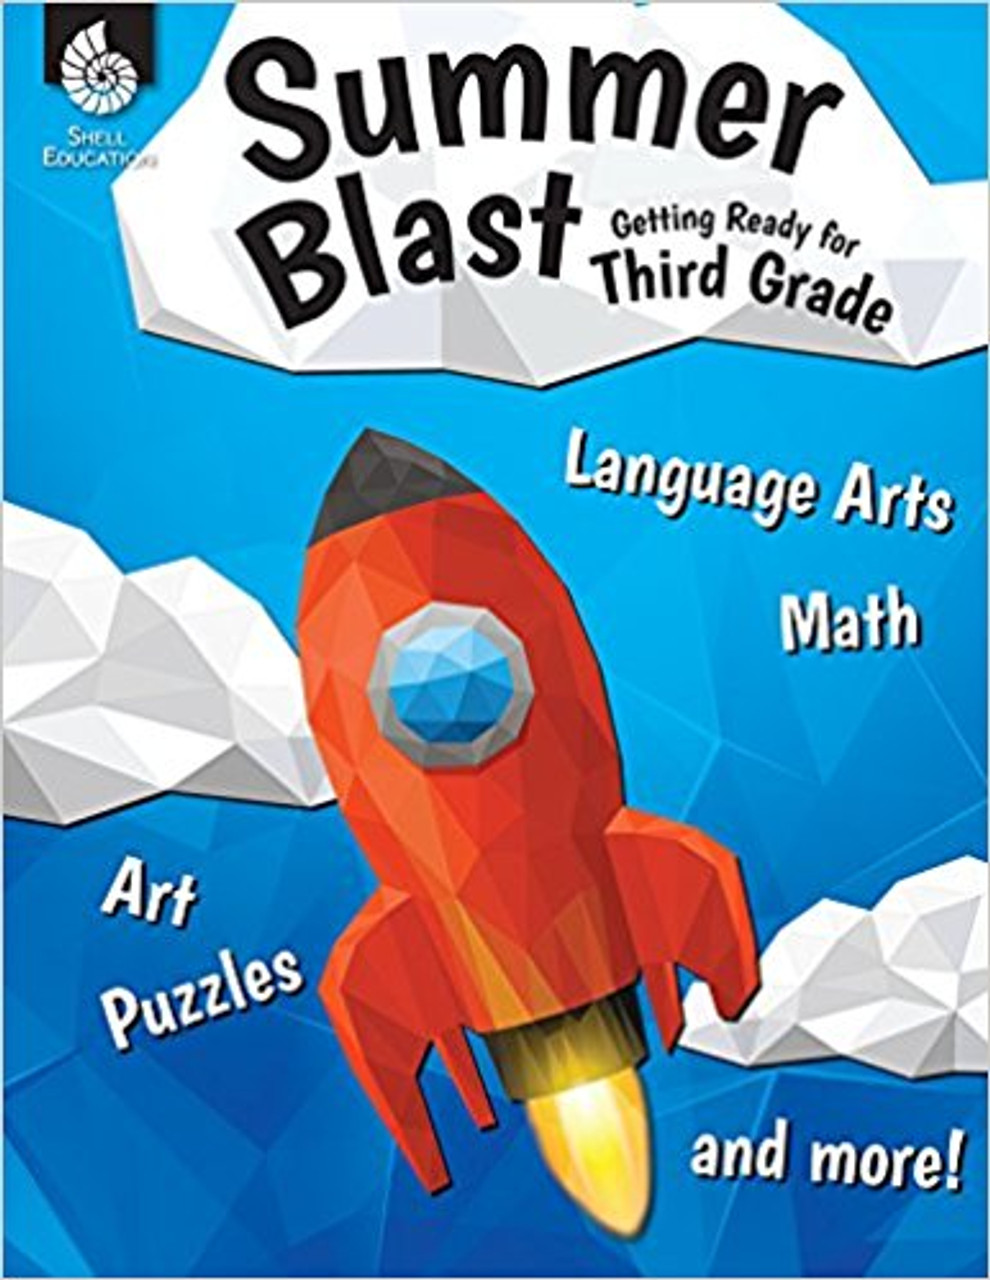 Summer Blast: Getting Ready for Third Grade by Wendy Conklin